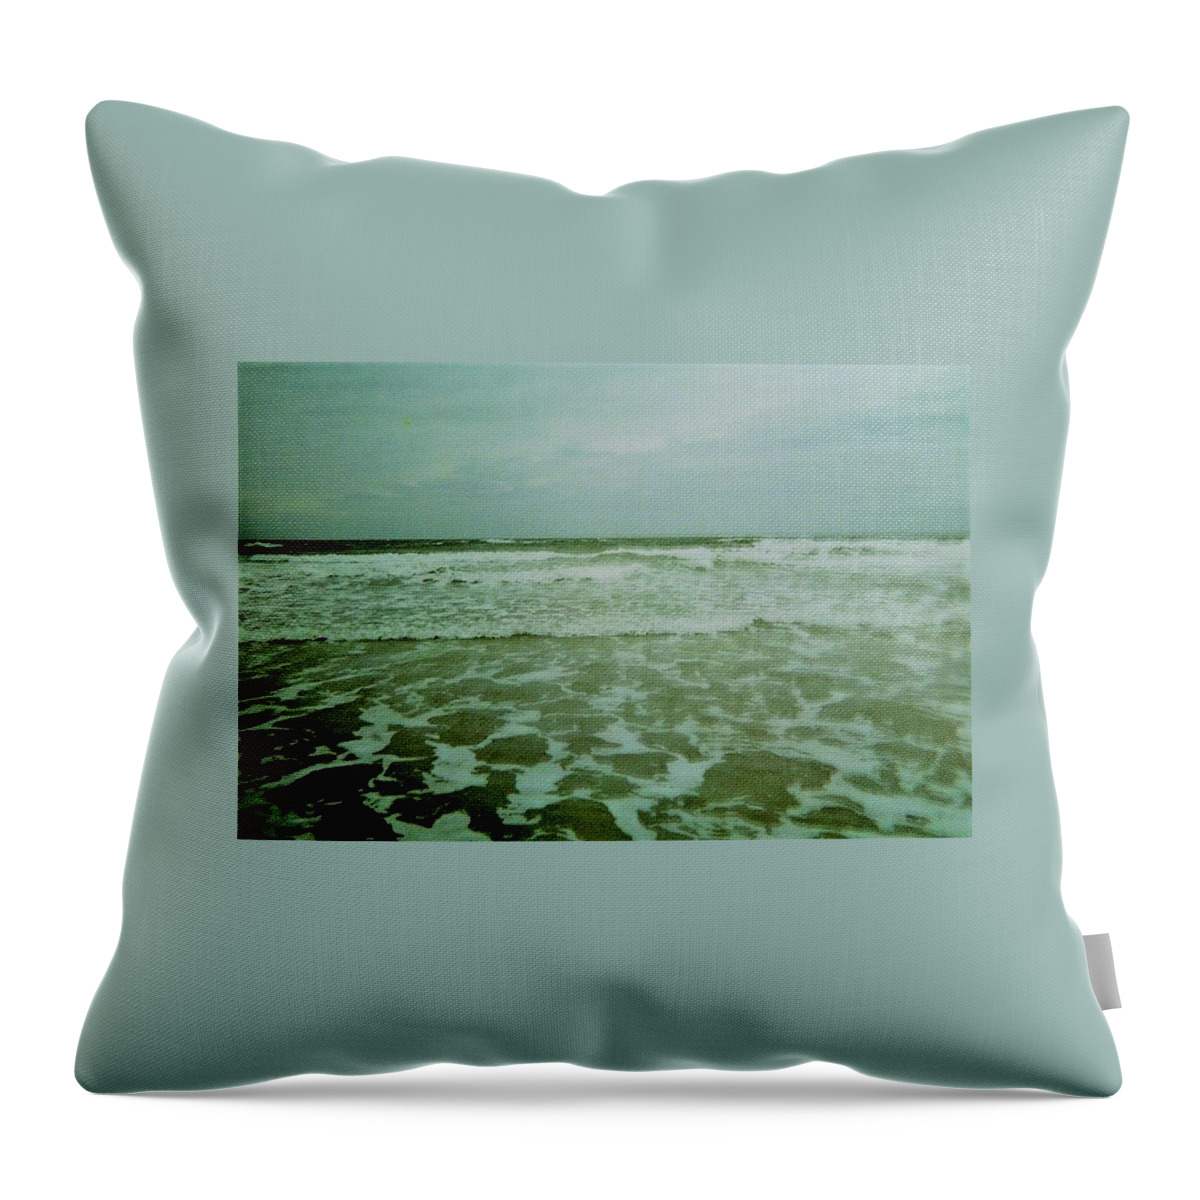 Ormond Beach Throw Pillow featuring the photograph Ormond Beach by Suzanne Berthier